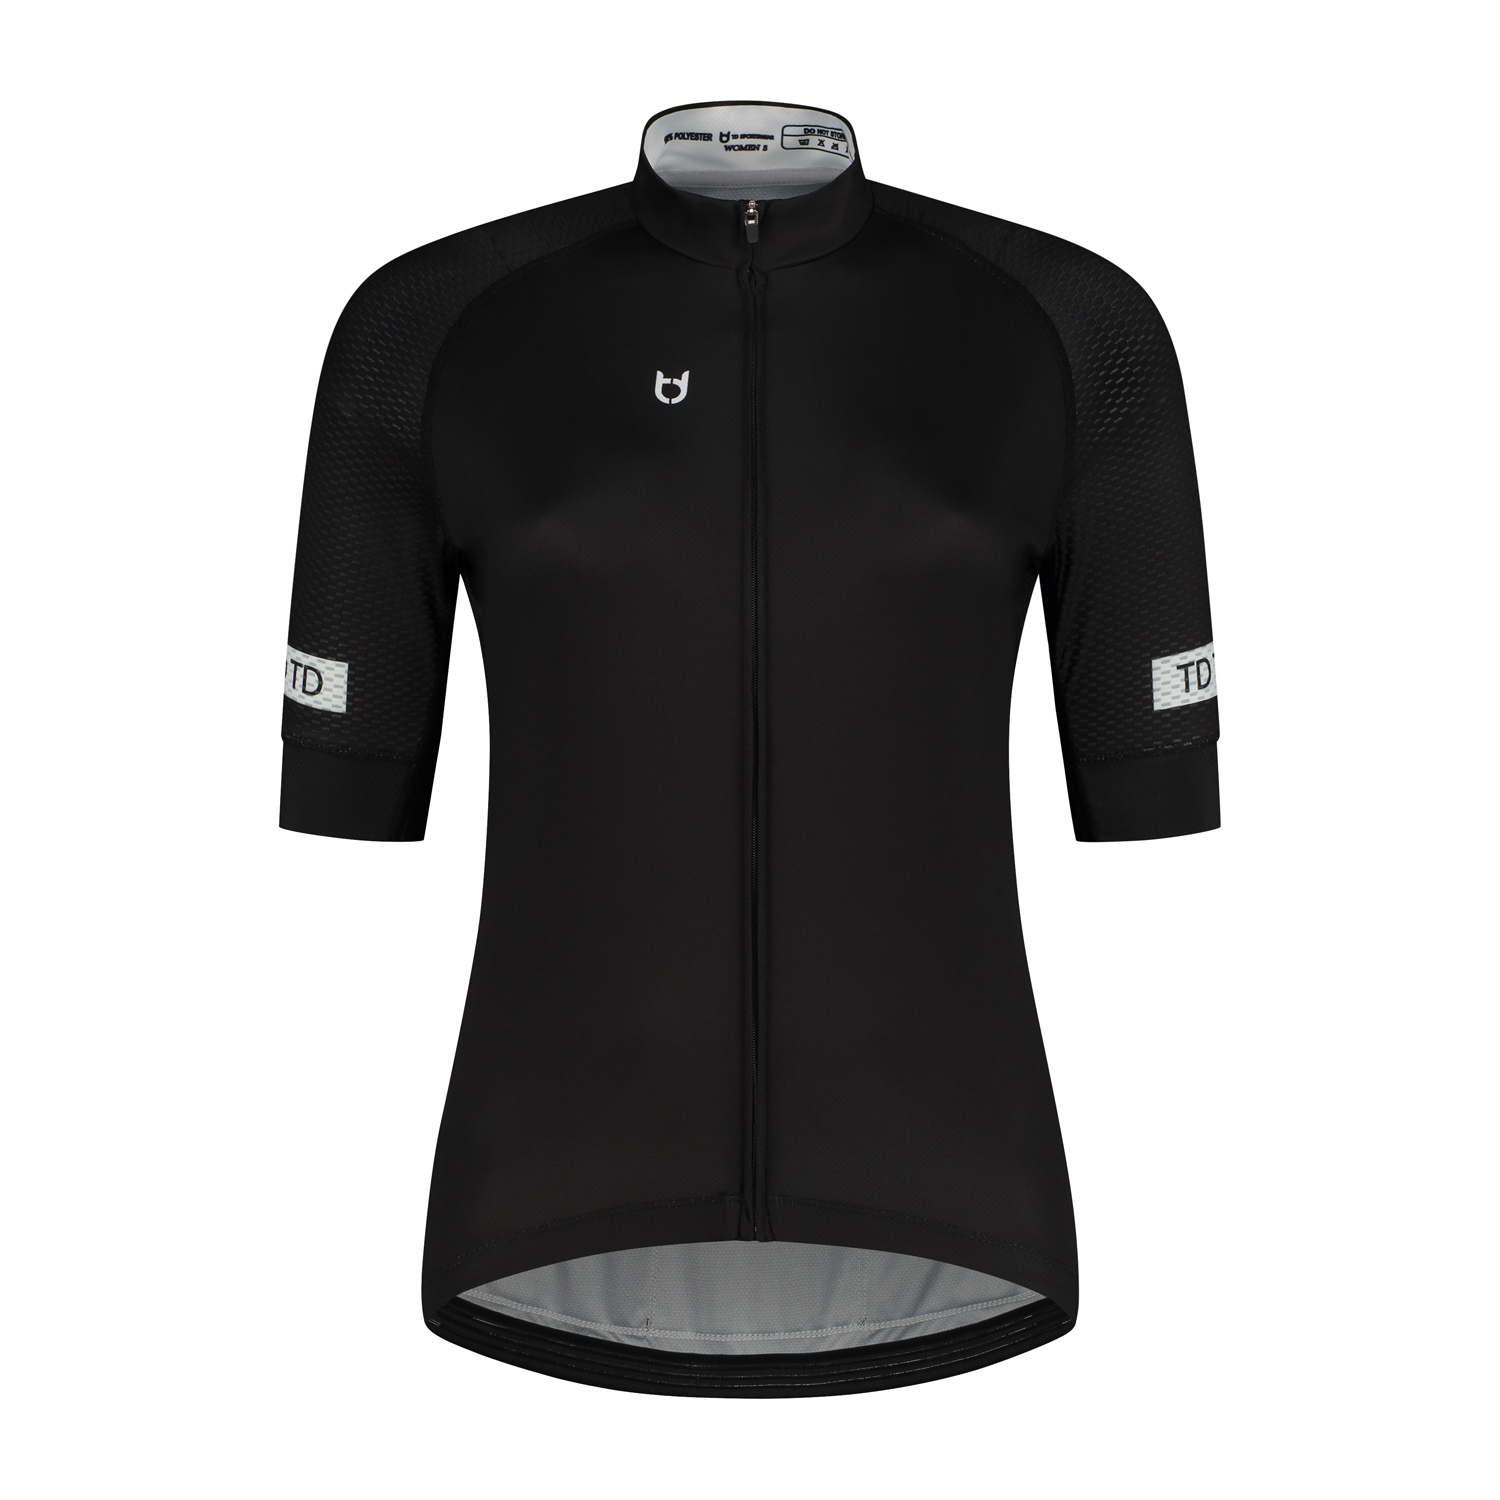 Ladies cycling jerseys black short sleeves front view of TD Sportswear